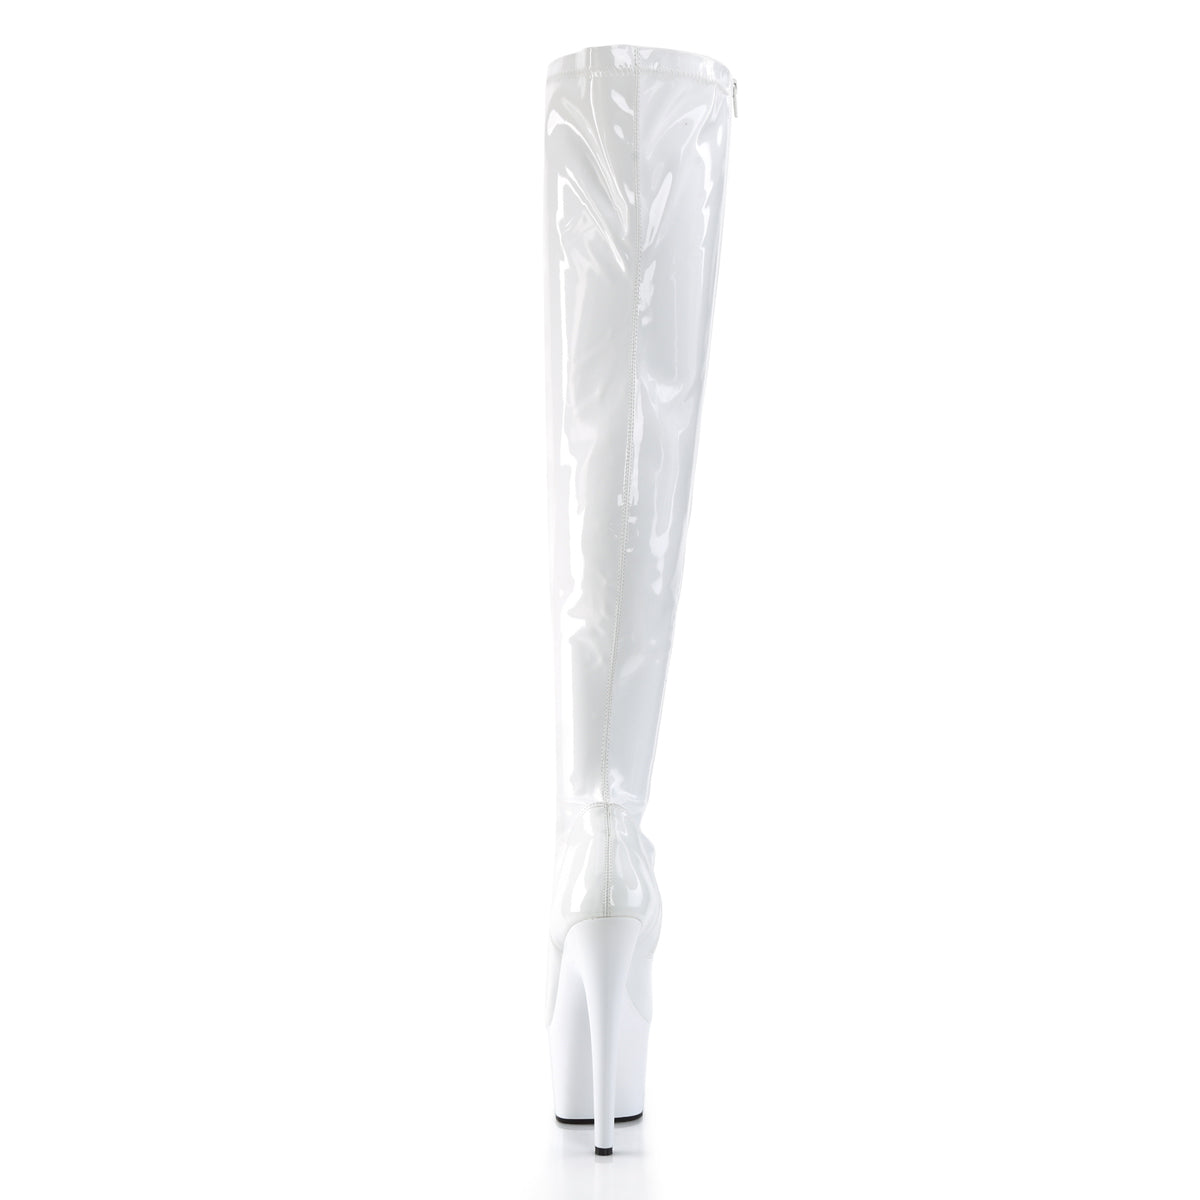 ADORE-3000 7 Inch Heel White Patent Pole Dancing Thigh Highs-Pleaser- Sexy Shoes Fetish Footwear